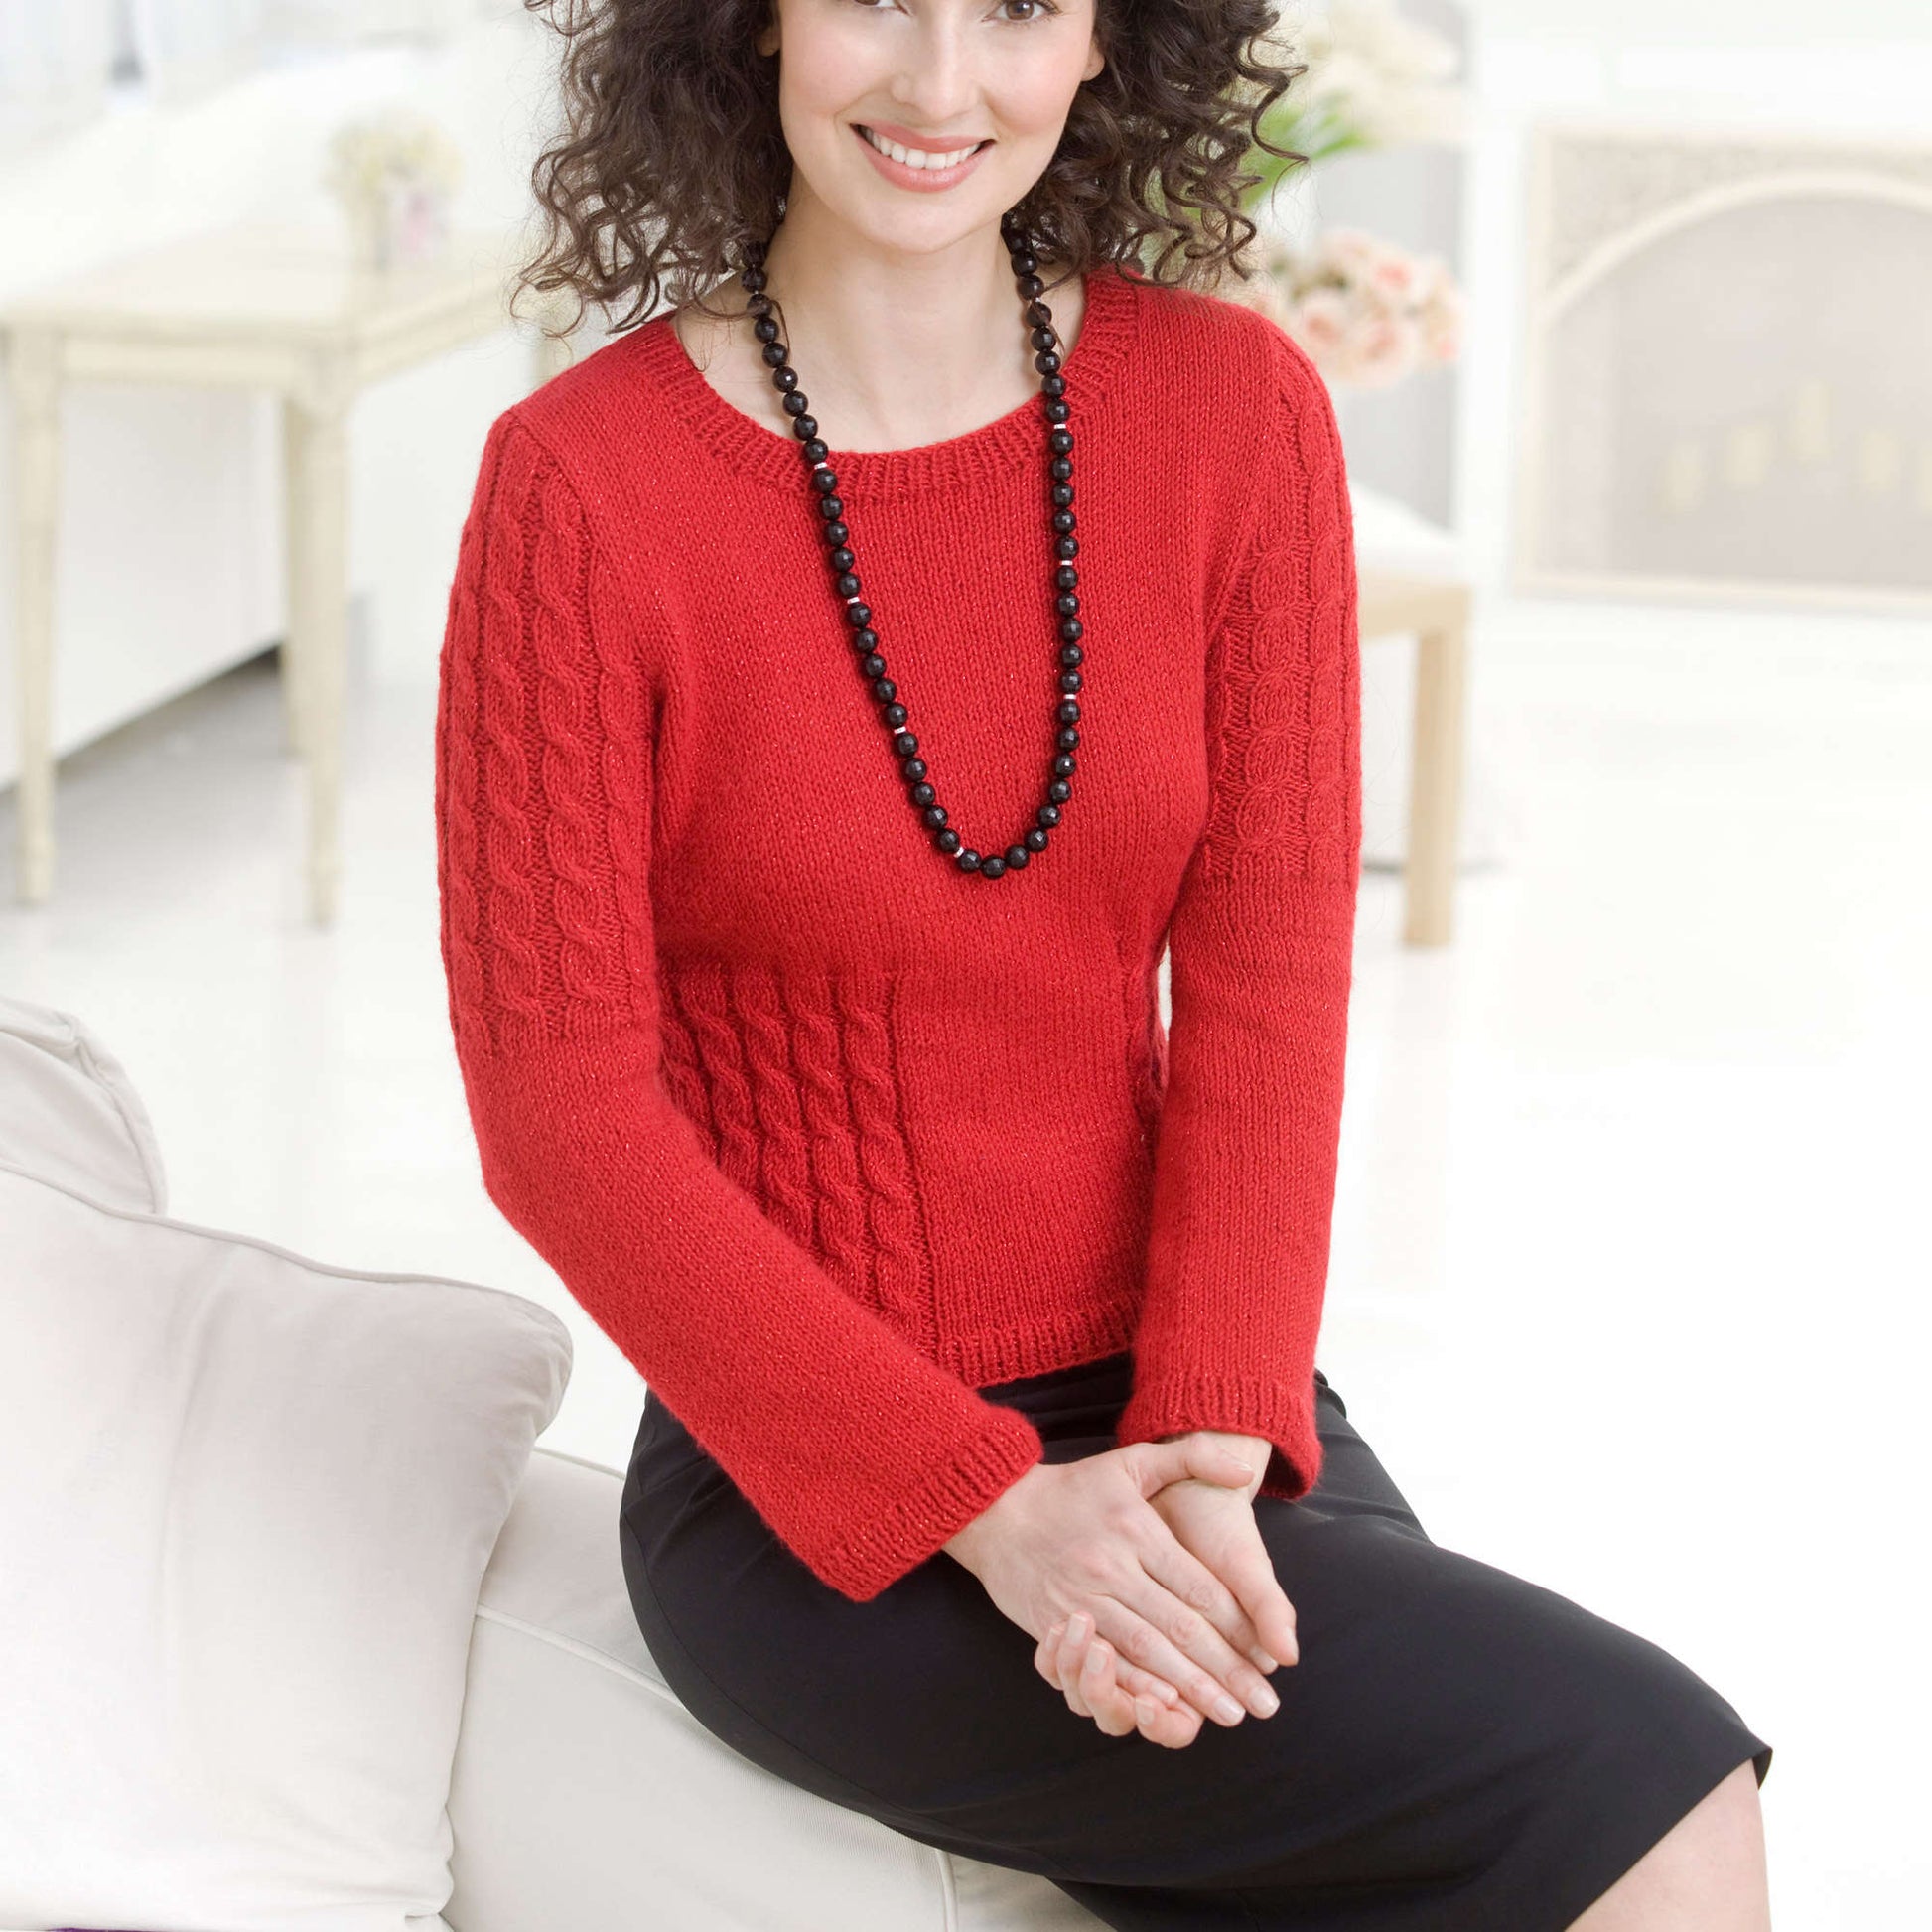 Free Red Heart Chic Cable Sweater Knit Pattern